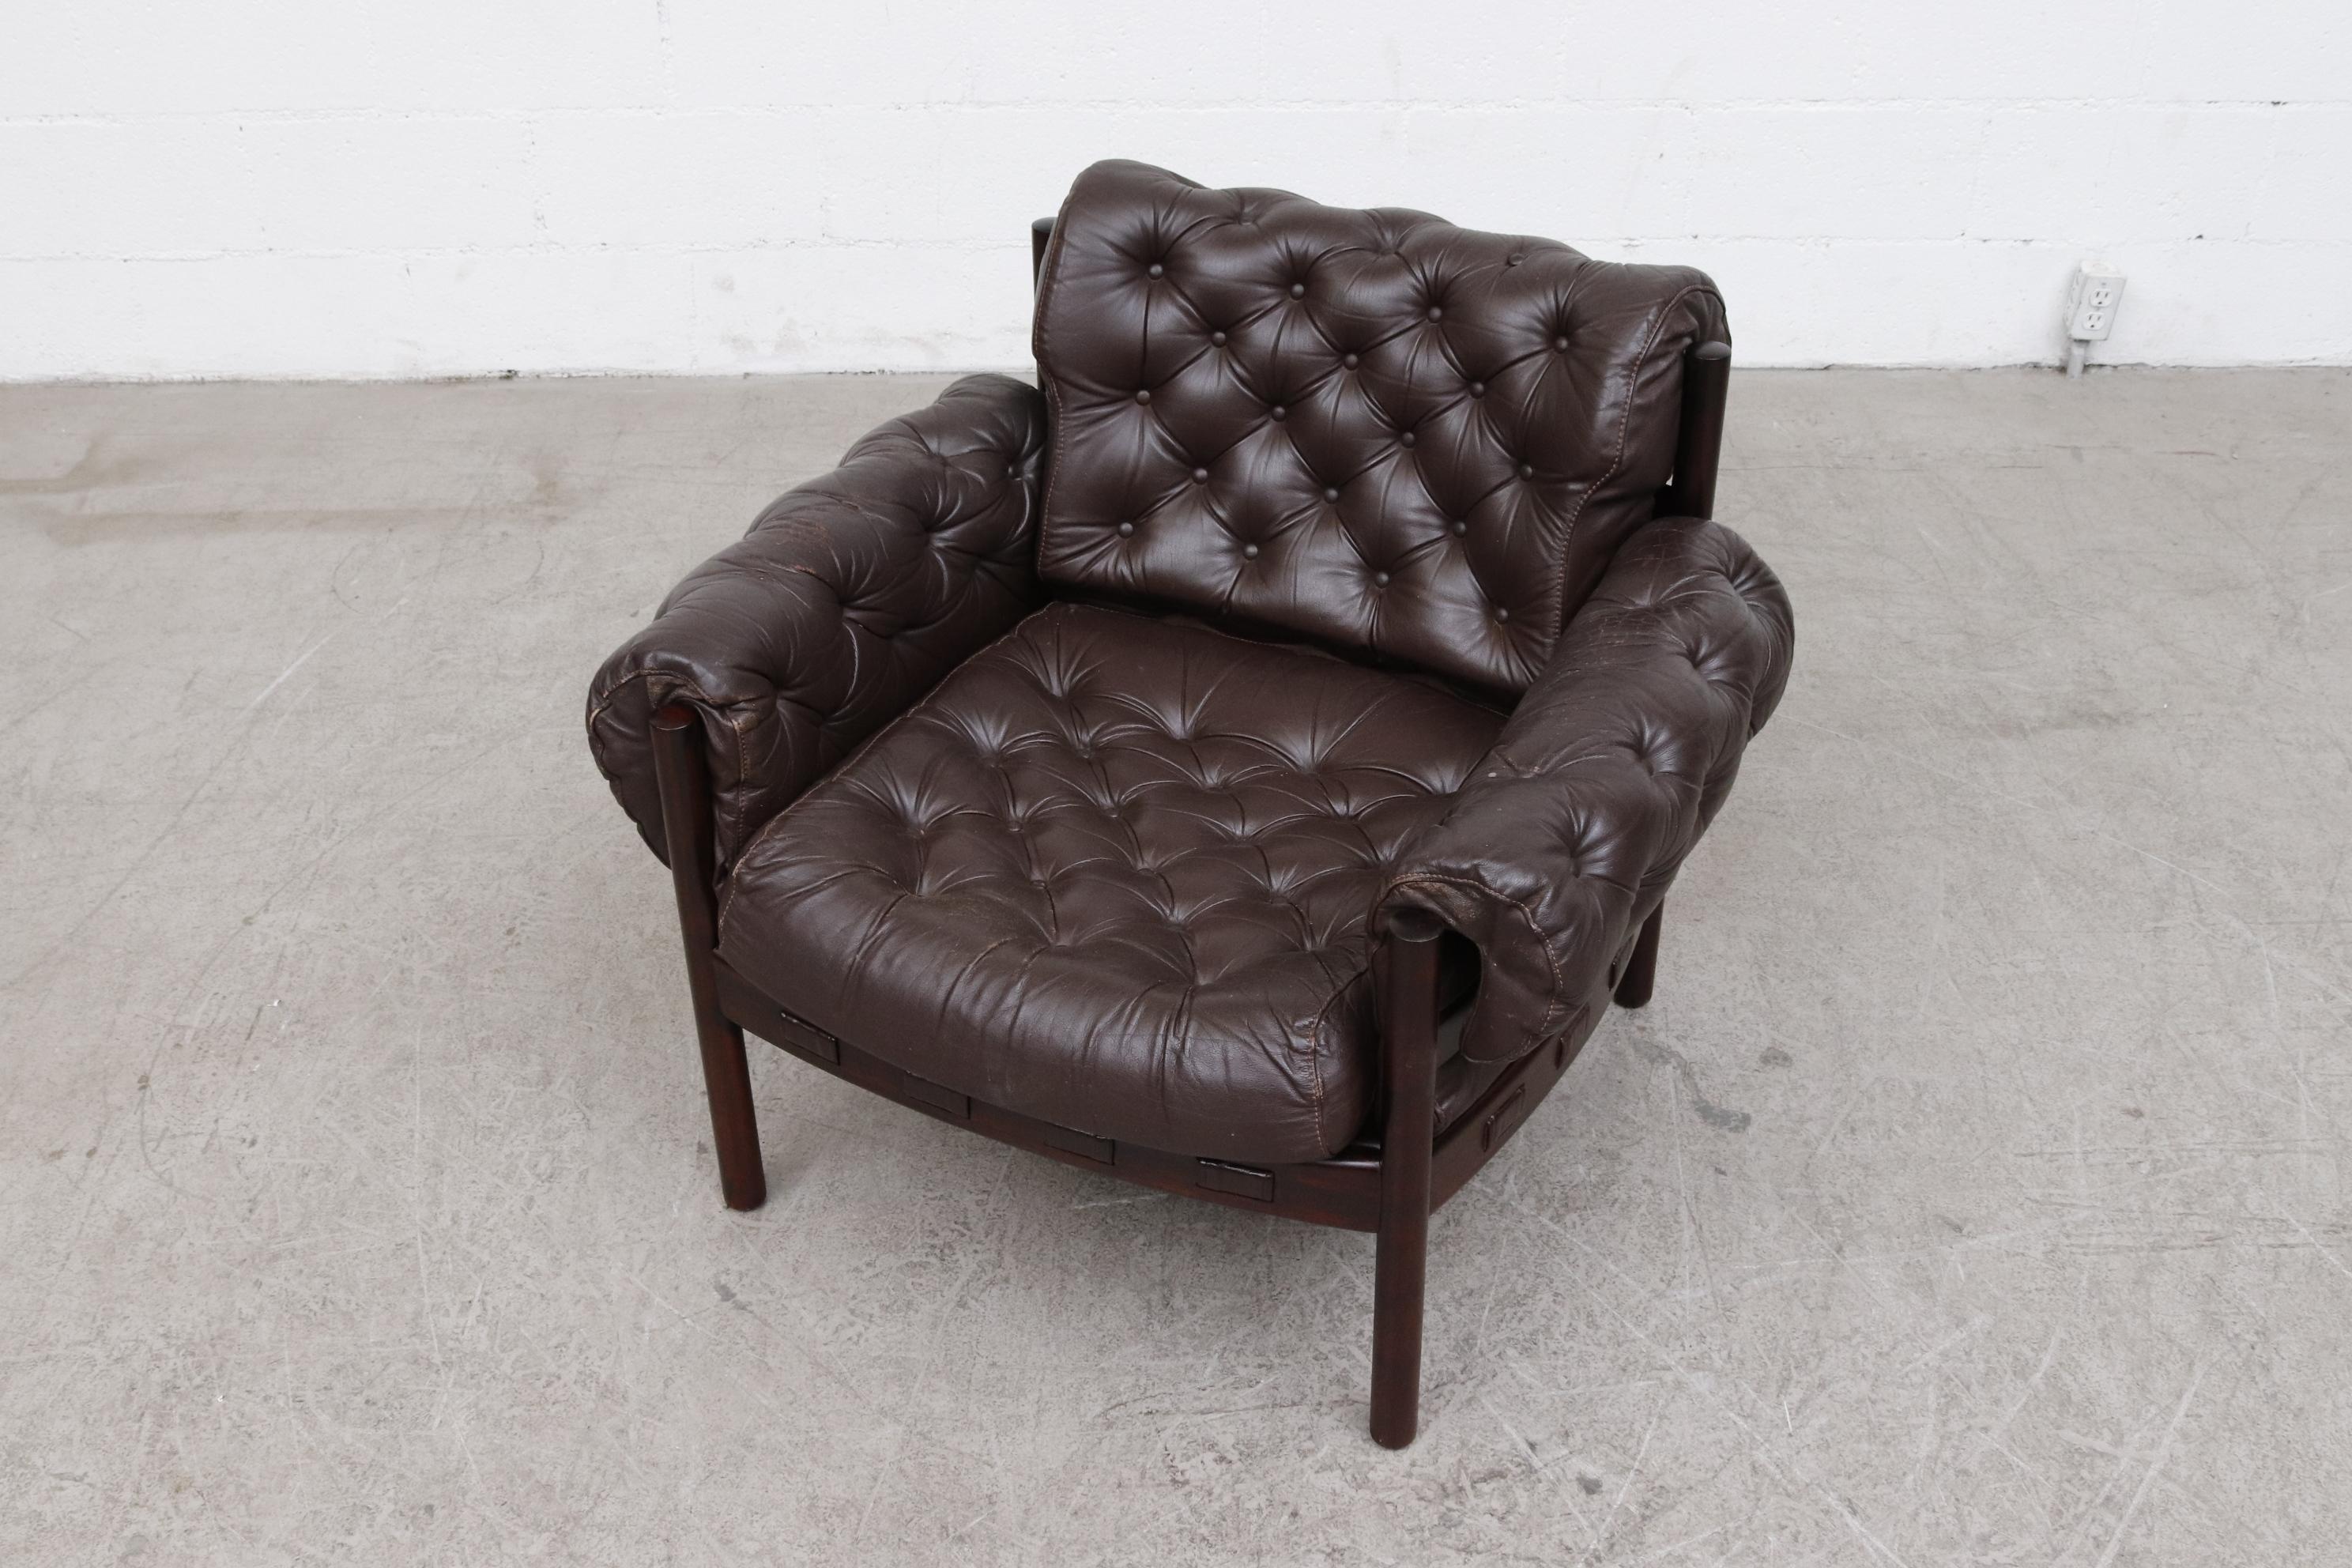 Mid-20th Century Arne Norell Style Tufted Leather Lounge Chair by Sven Ellekaer for Coja